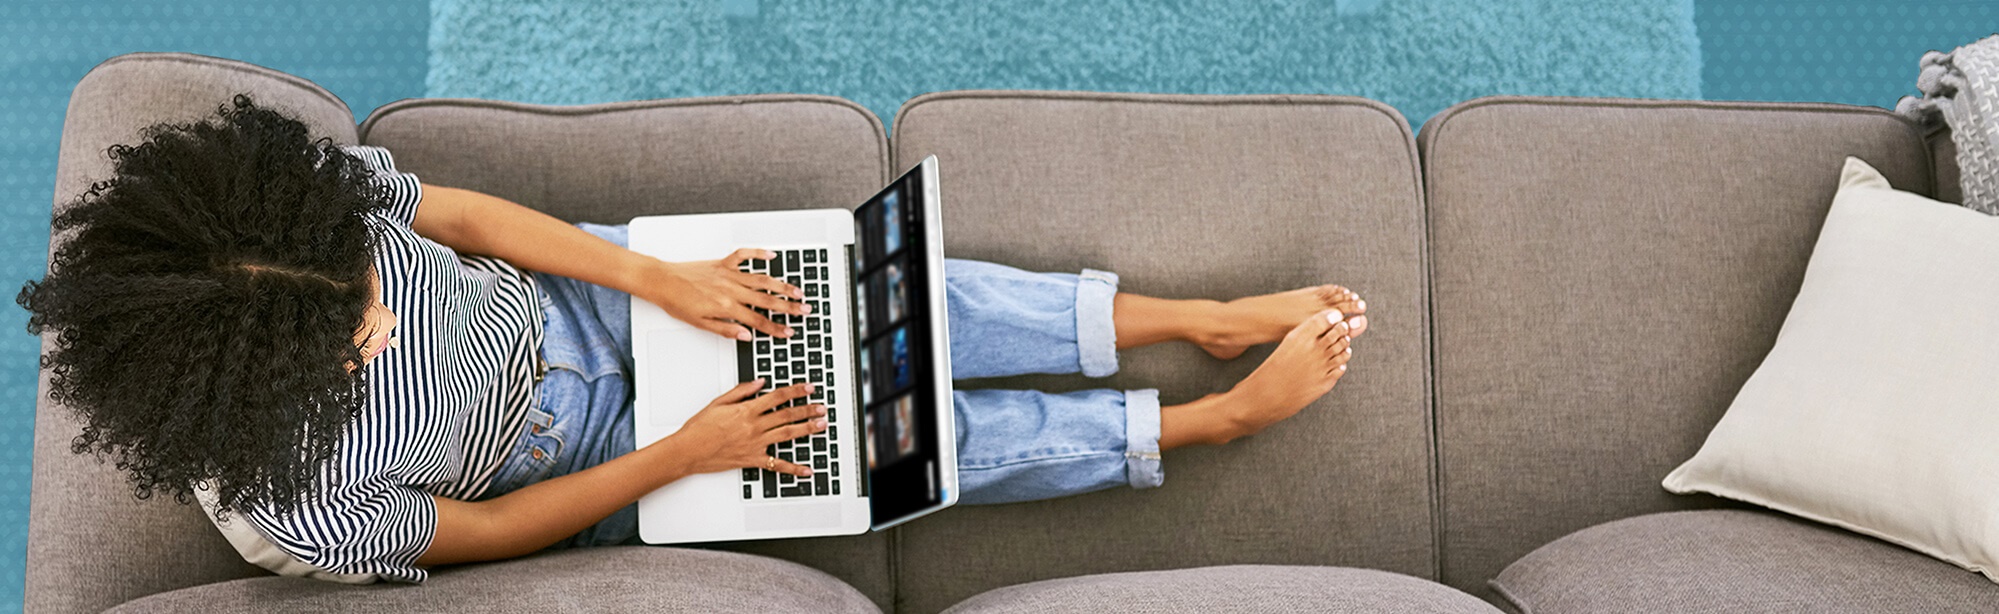 female sitting on couch with laptop